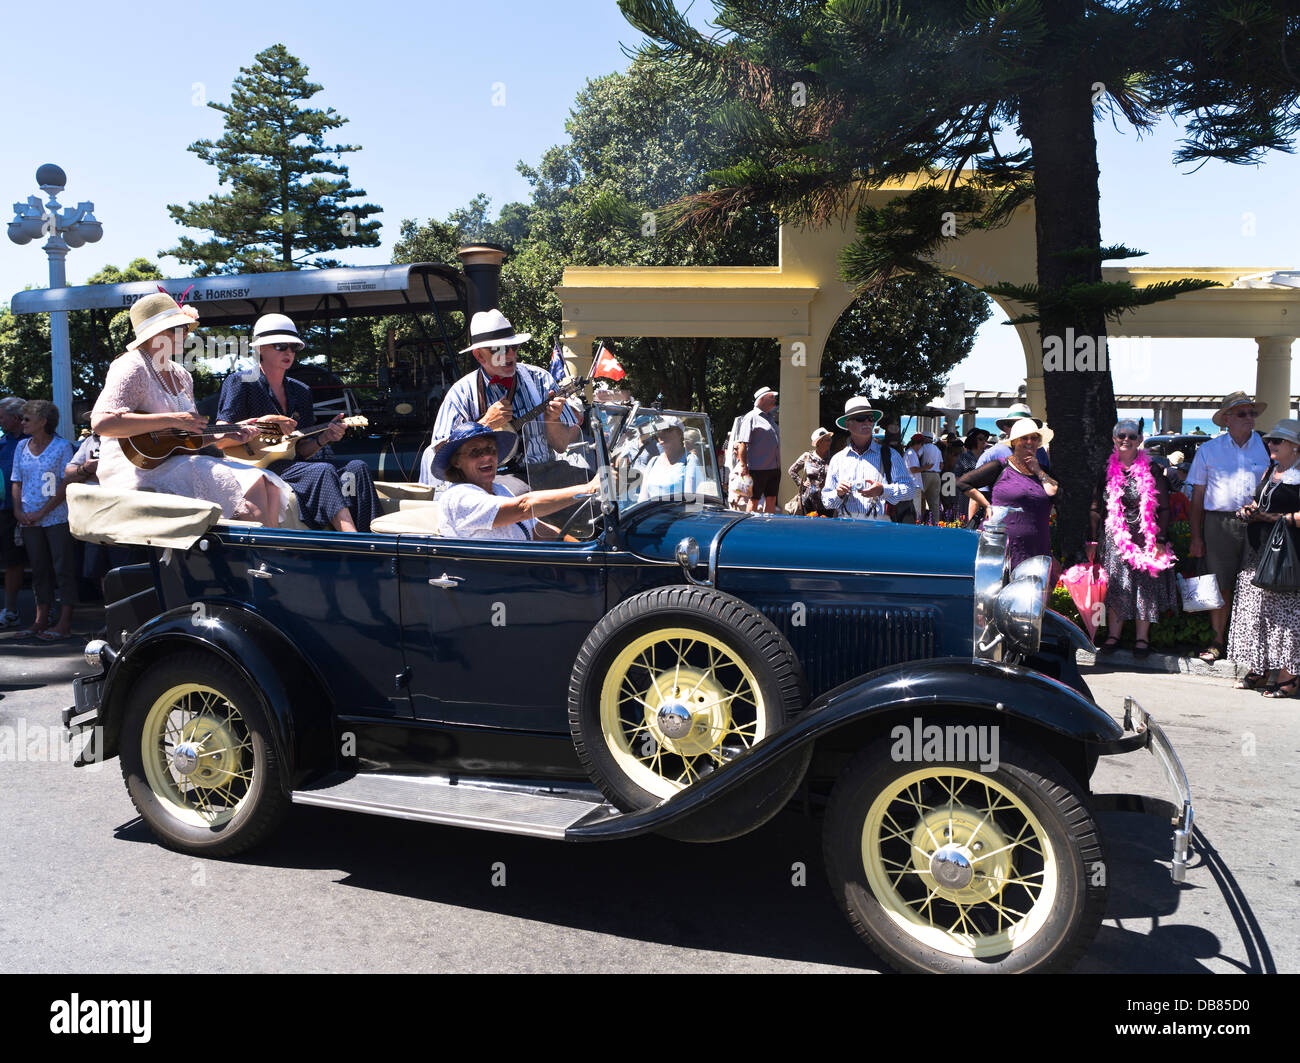 dh Art Deco weekend NAPIER NEW ZEALAND People festival music band 1930s vintage car parade driving Stock Photo